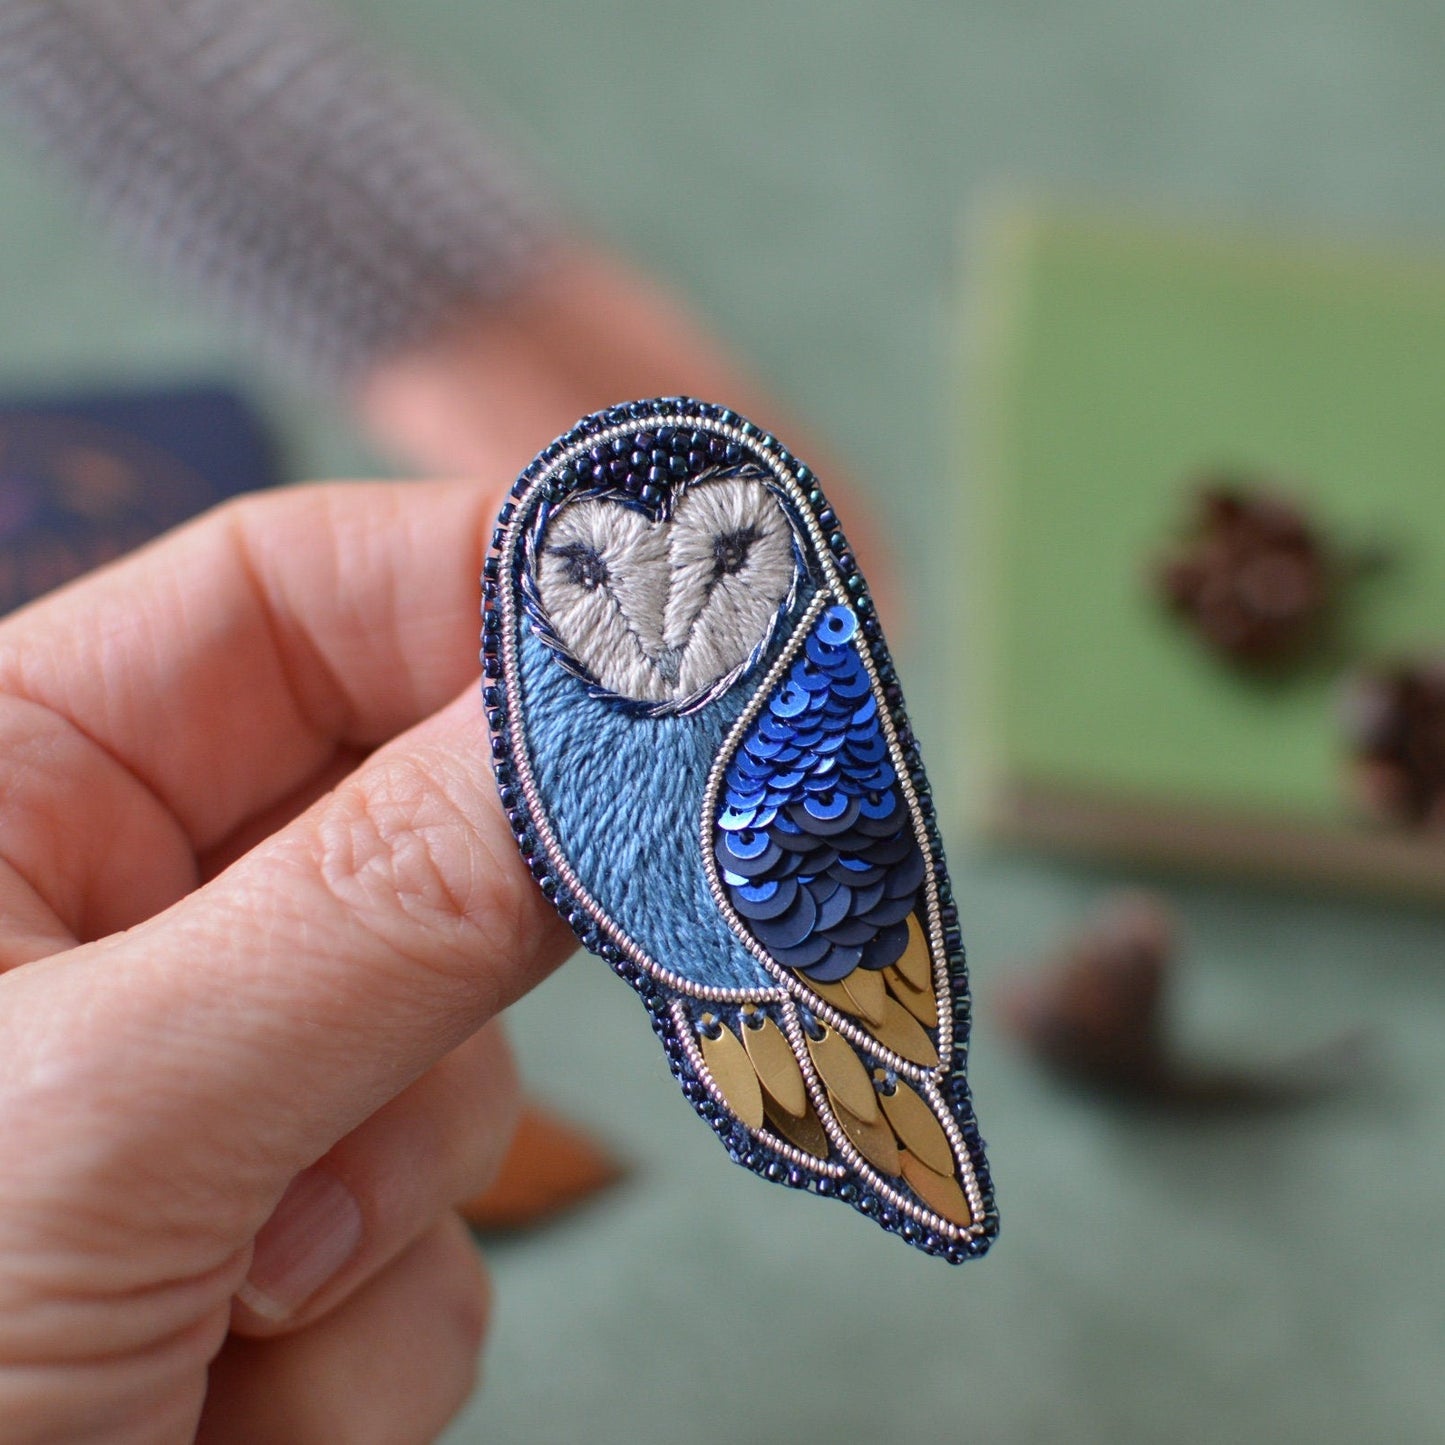 Embroidered Barn Owl Brooch in Blue